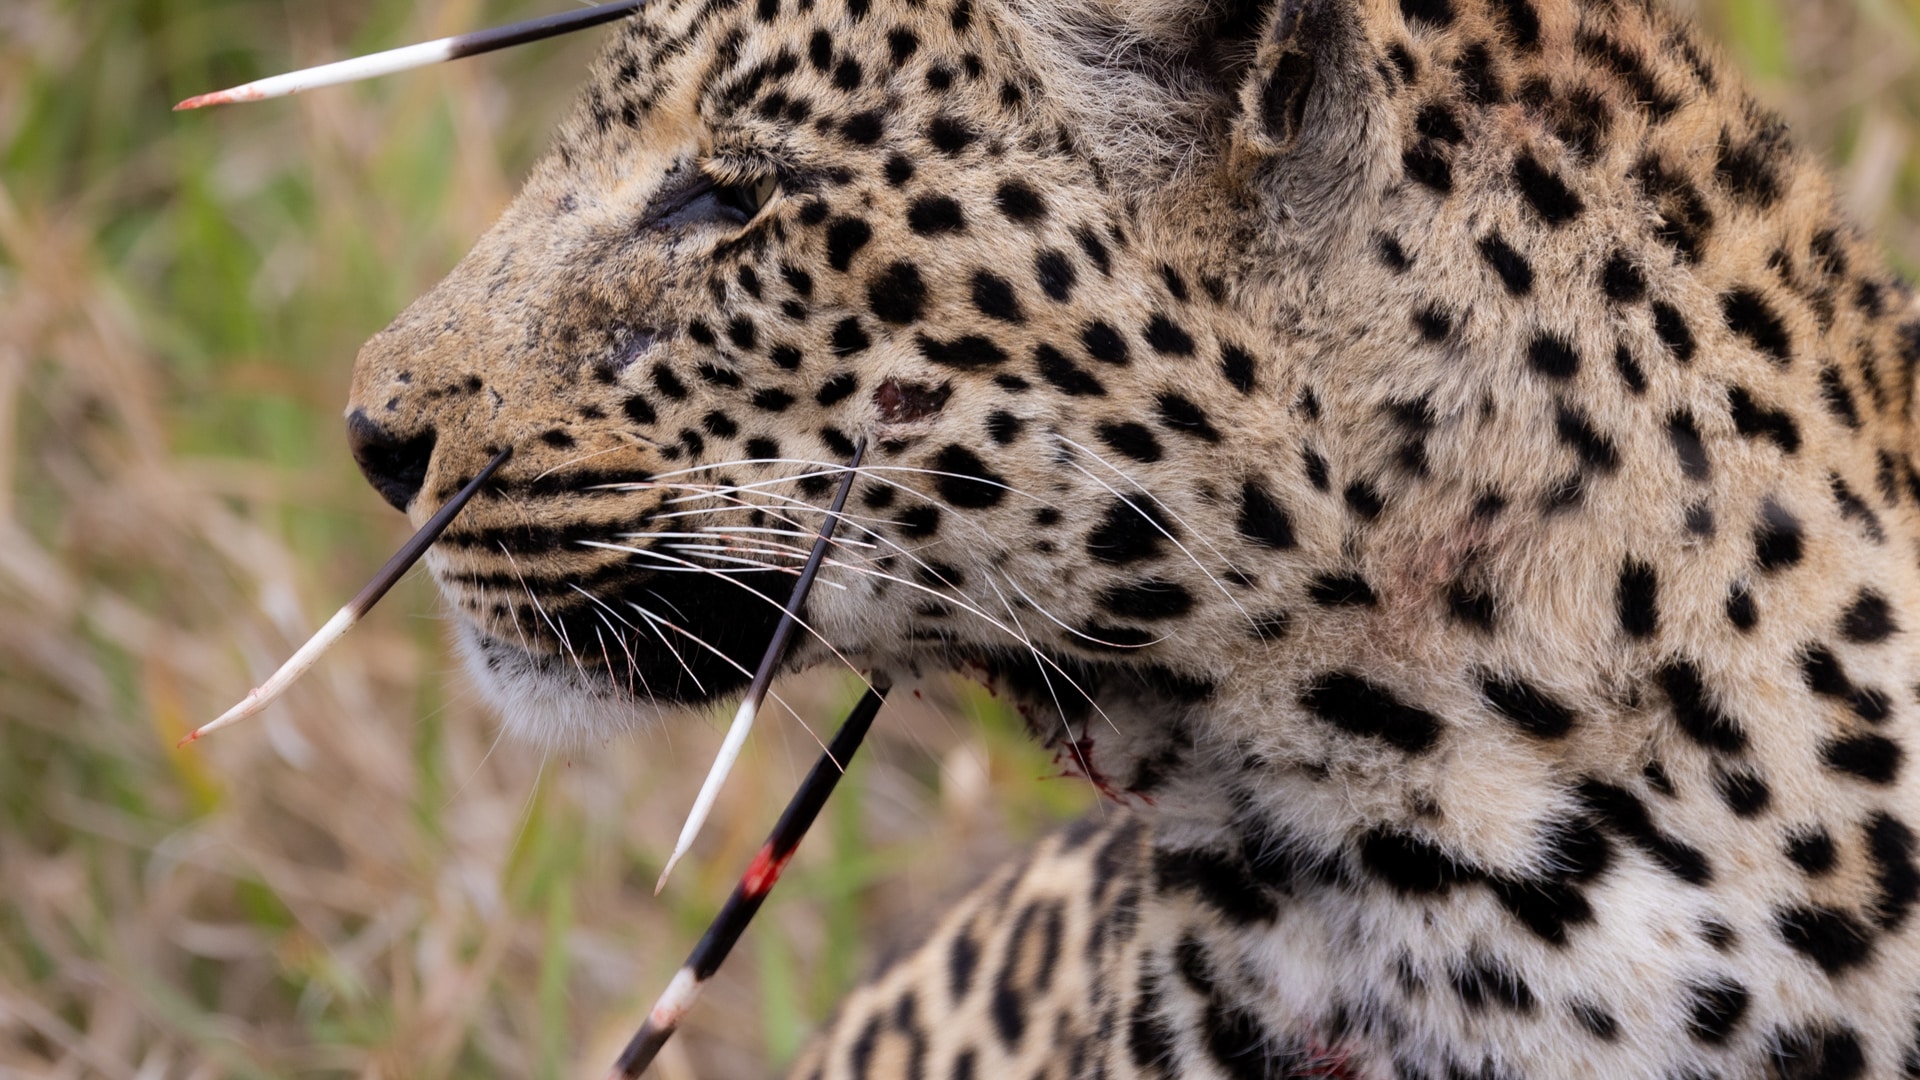 A leopard with porcupine quills in its face and neck – a victim of the one of Africa’s secret seven safari animals.